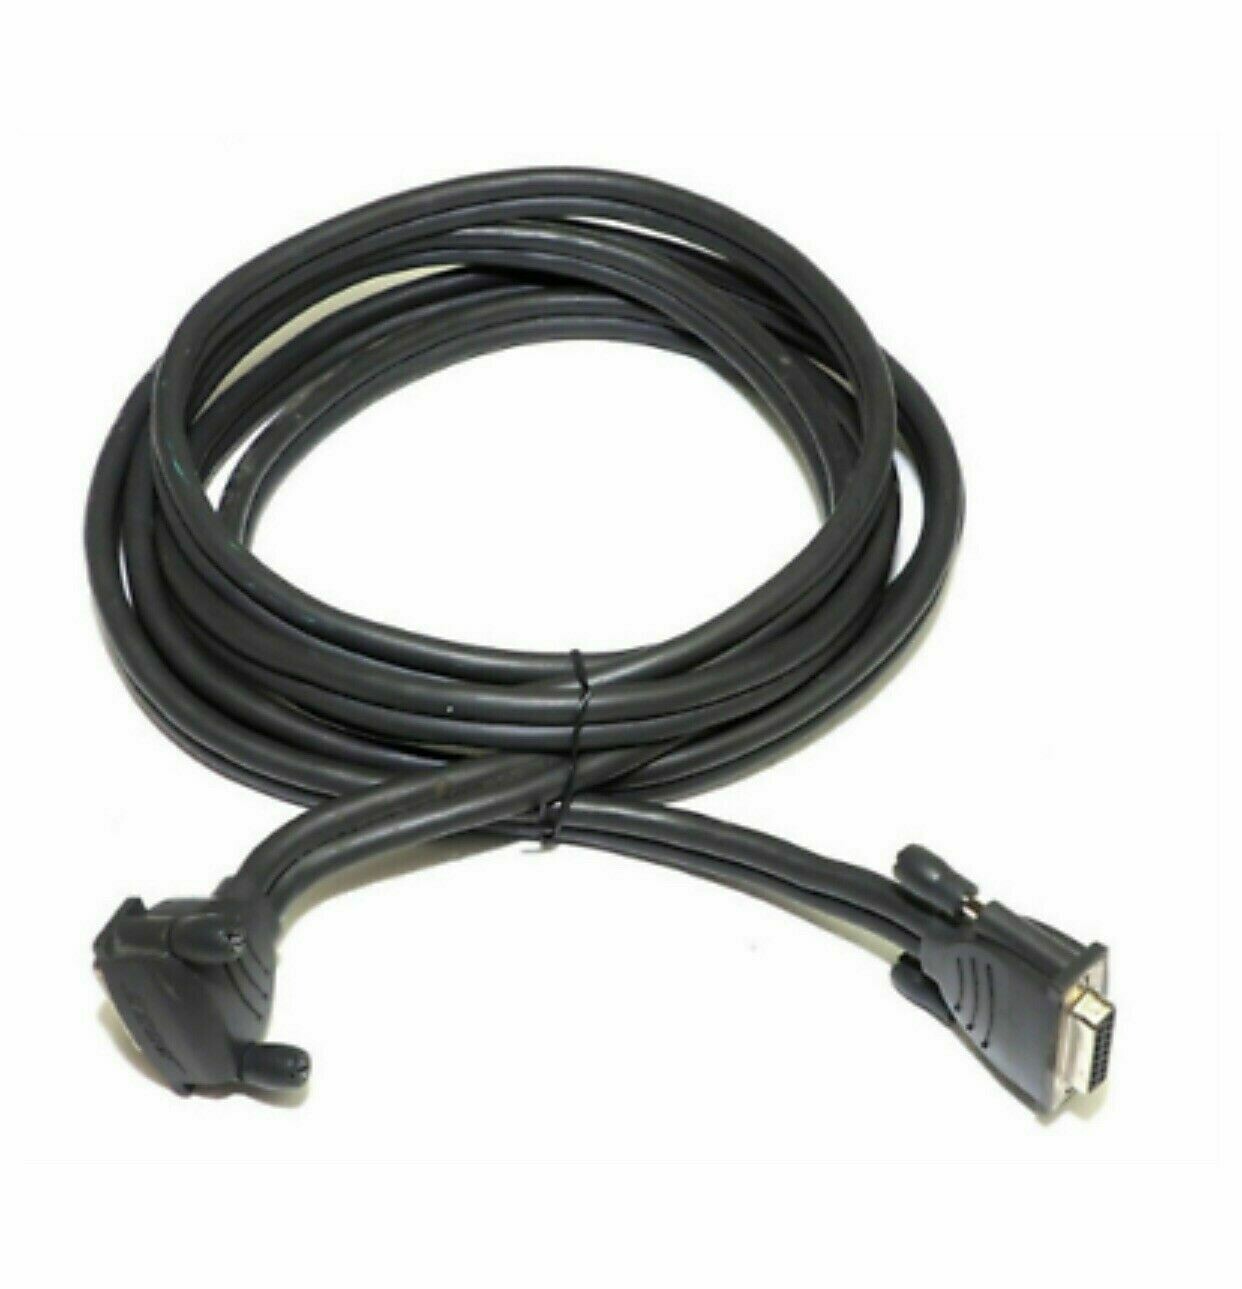 UL AC Power Cord for Bose 321 Acoustimass Powered Speaker System Subwoofer 